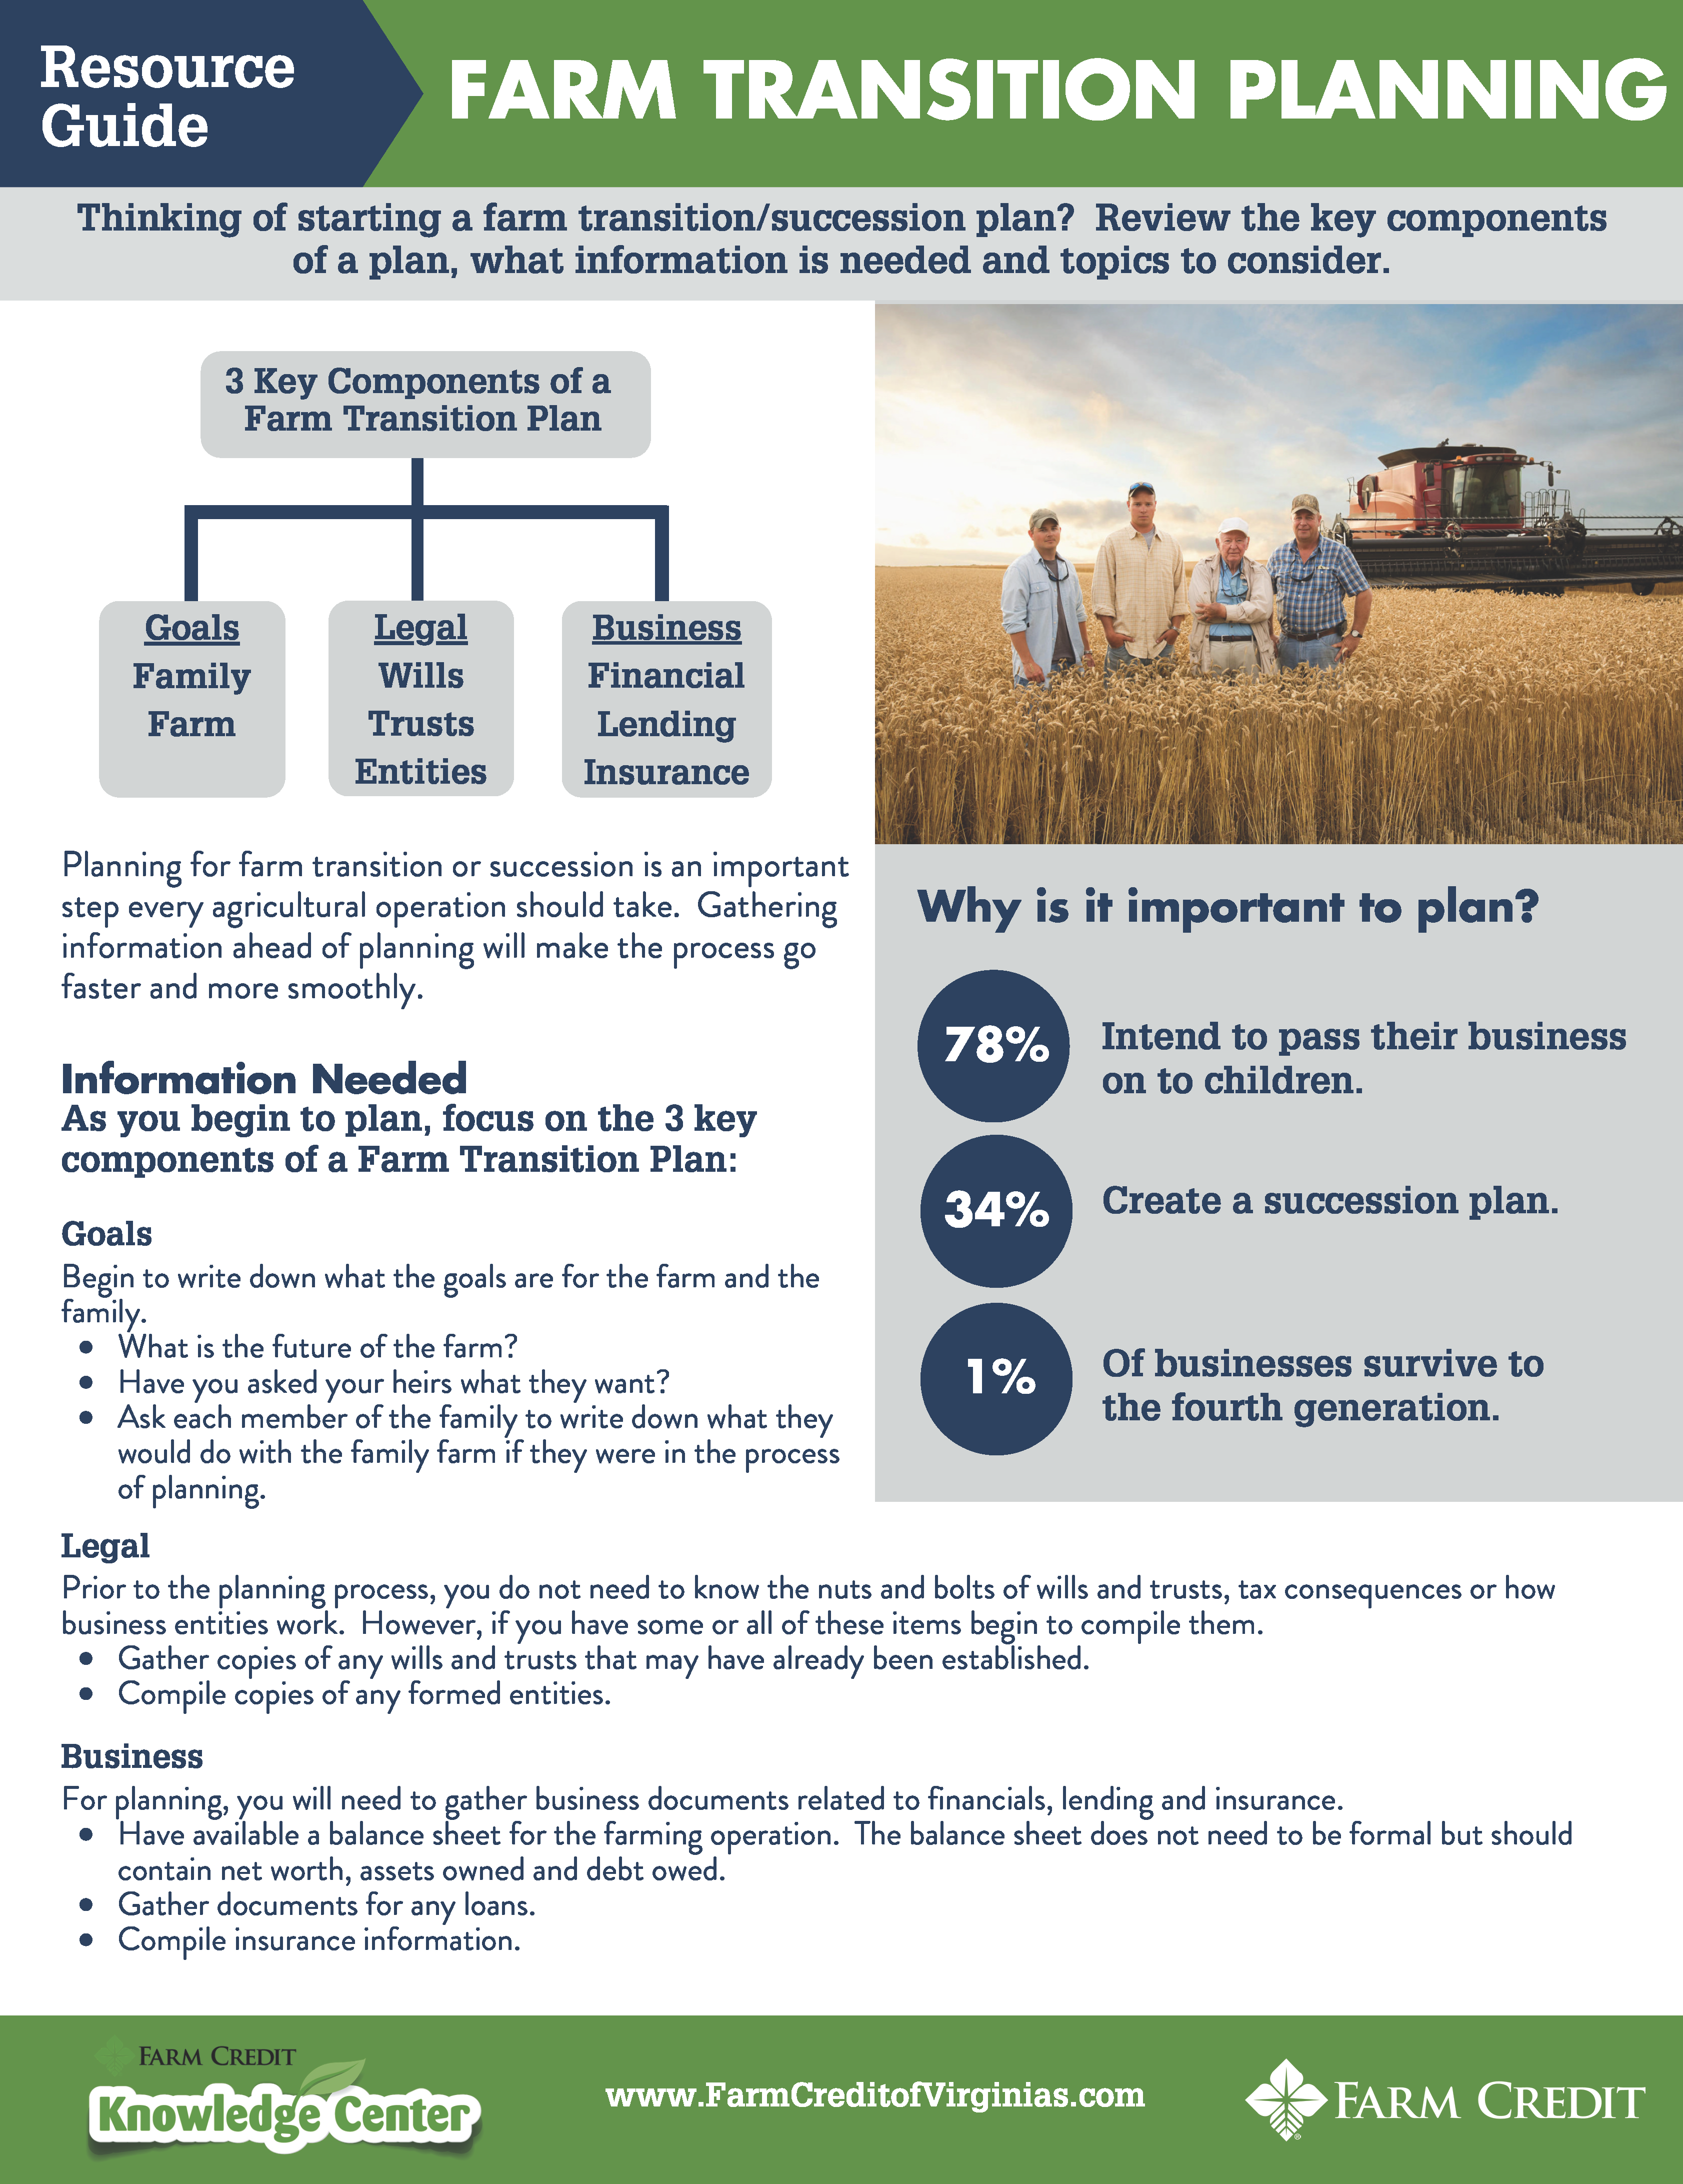 Farm Transition Planning Resource Guide page 1